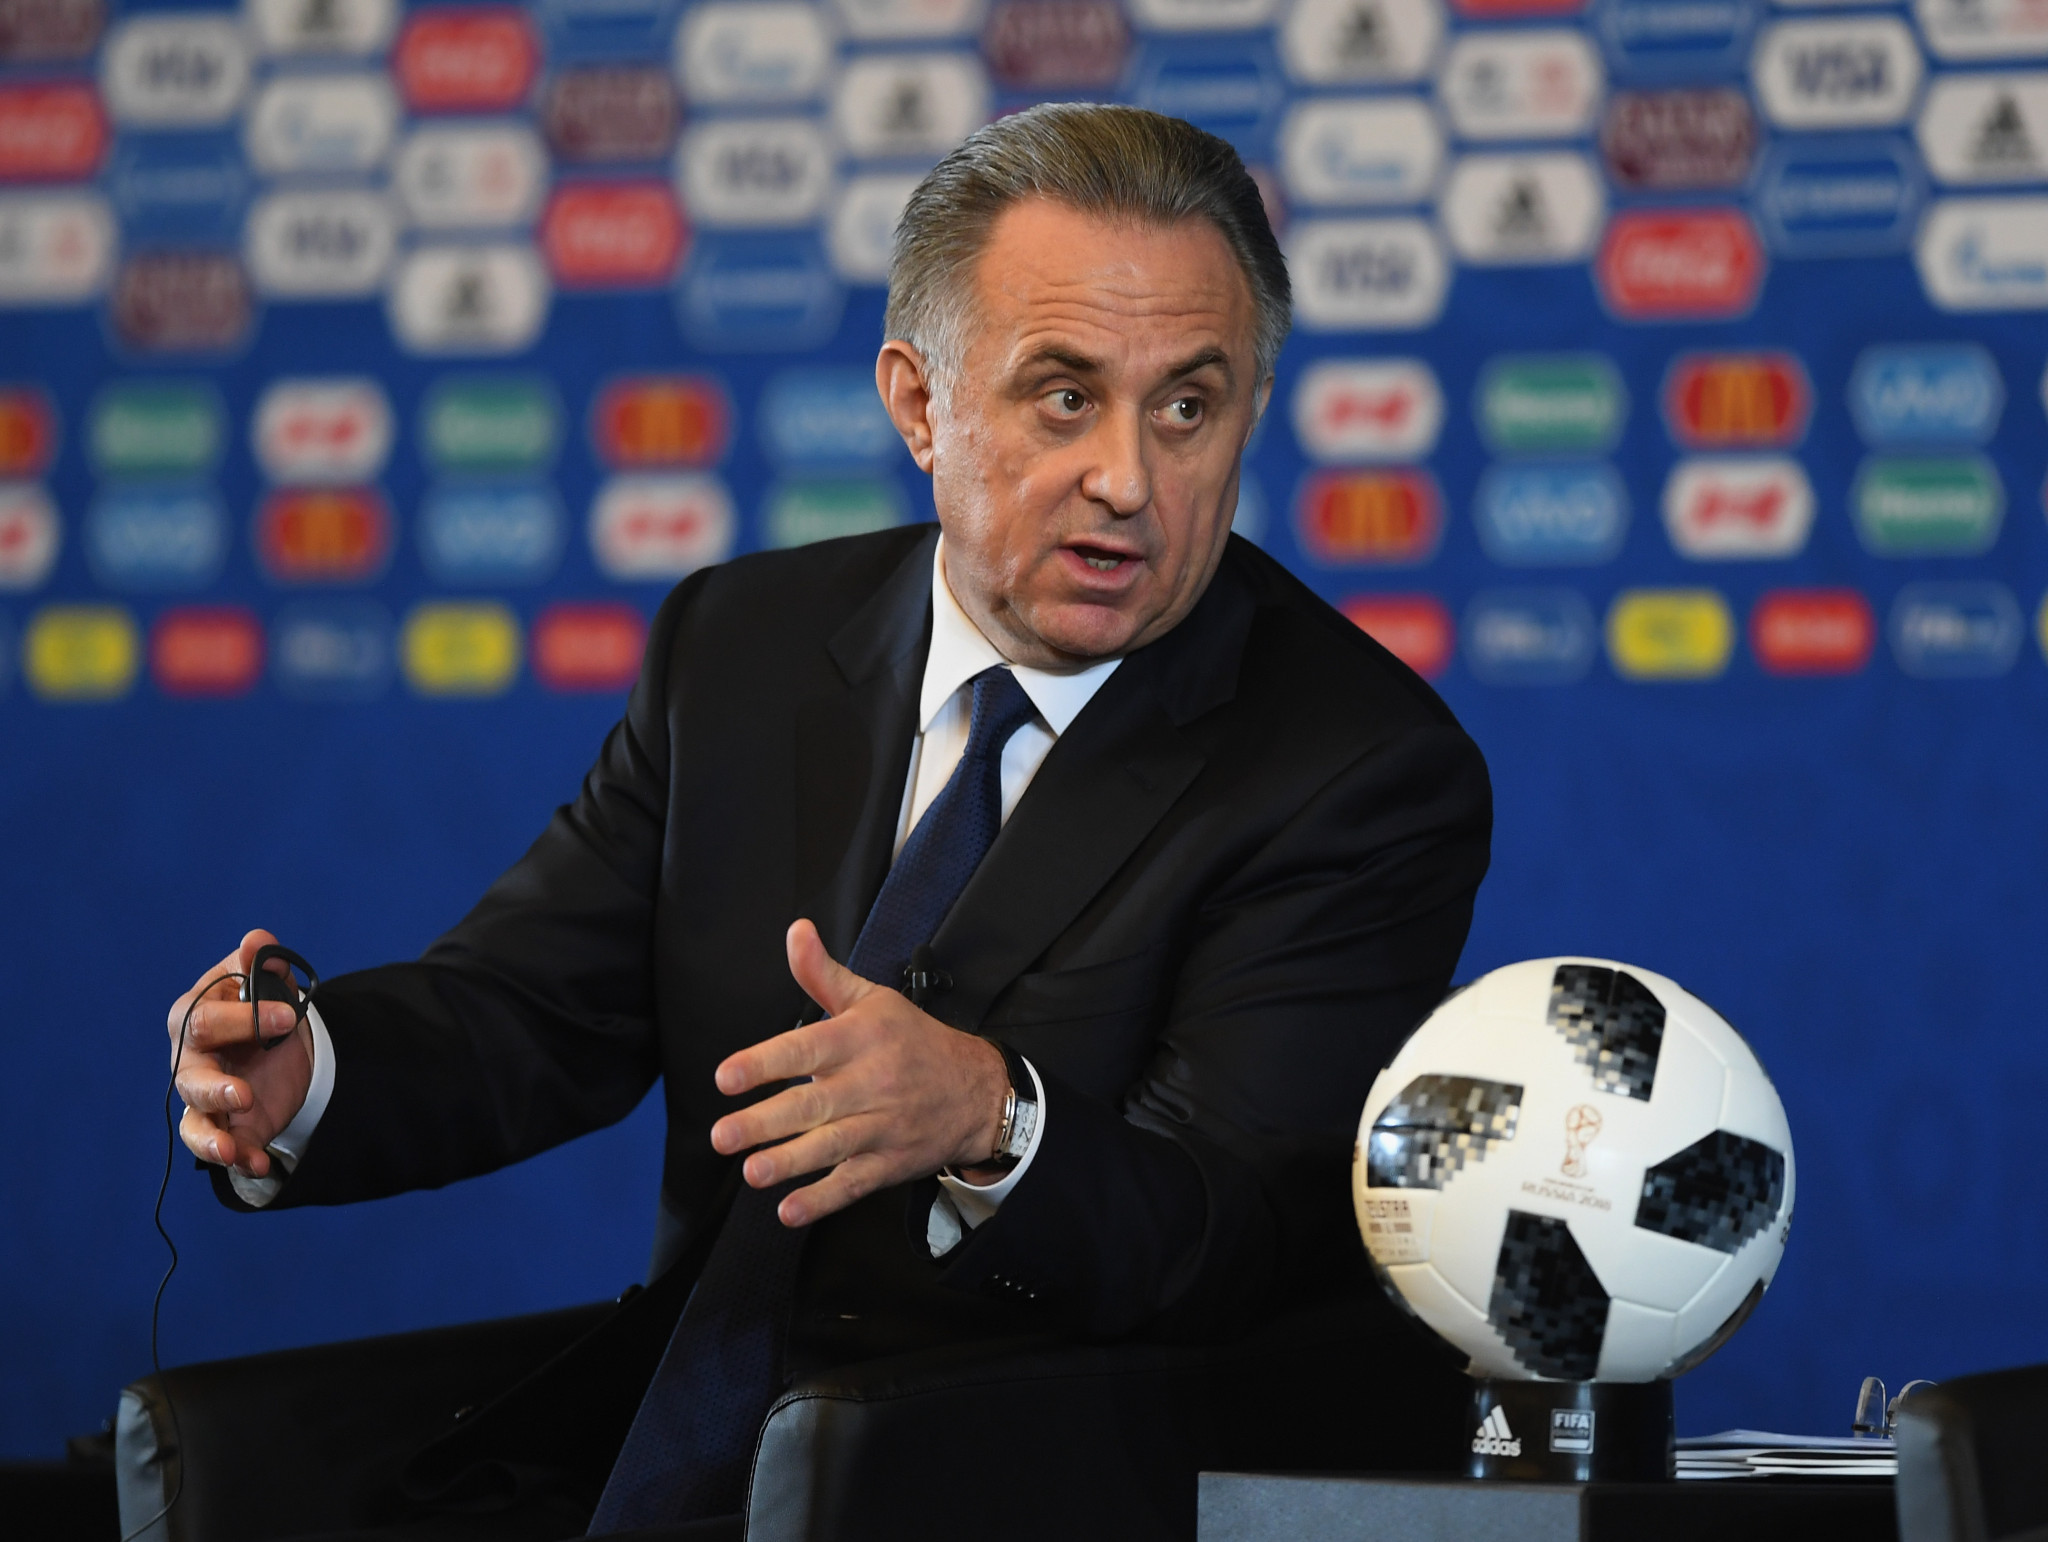 Vitaly Mutko looks set to continue his Presidency of the RFU ©Getty Images